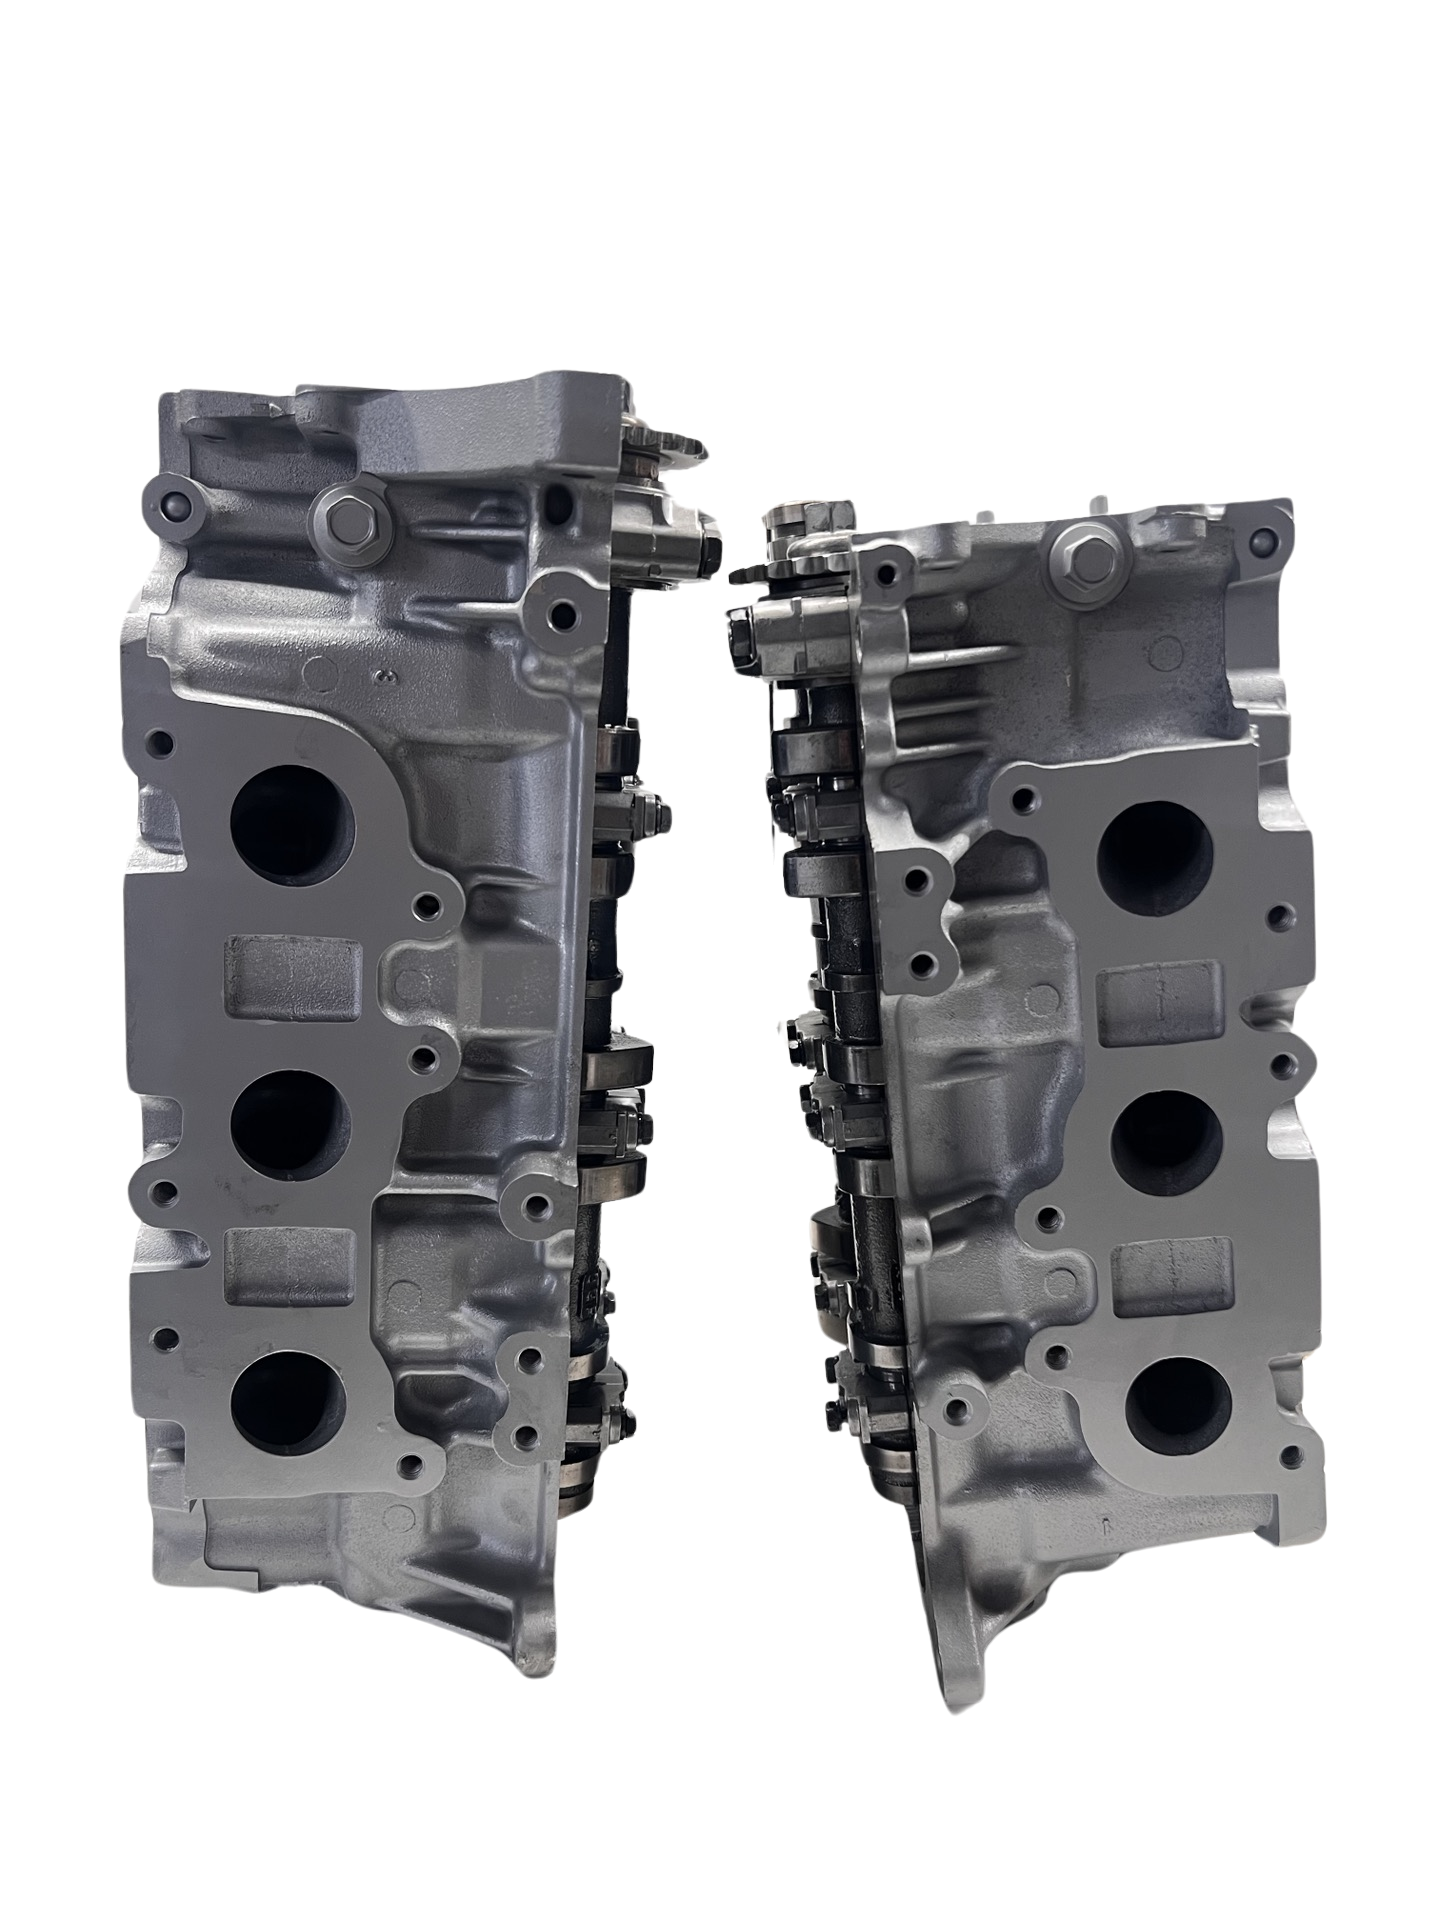 Exhaust side of cylinder heads for a Toyota 1GR-FE 4.0L DOHC (SOLD IN PAIR)